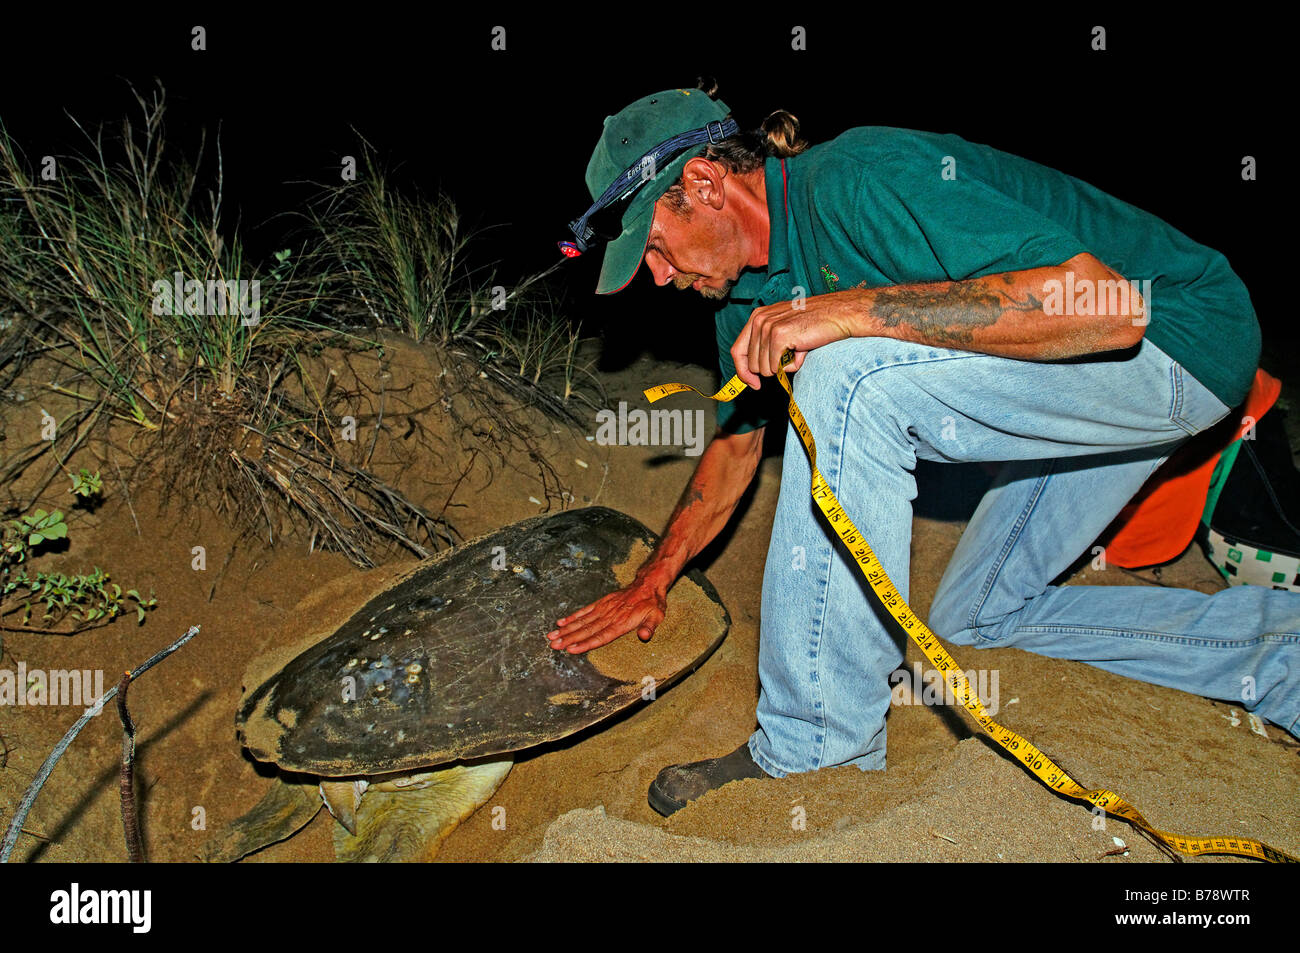 Ranger measuring a Sea turtle (Cheloniidae) at night, Cape York Turtle Rescue, Mapoon, Cape York Peninsula, Queensland, Austral Stock Photo